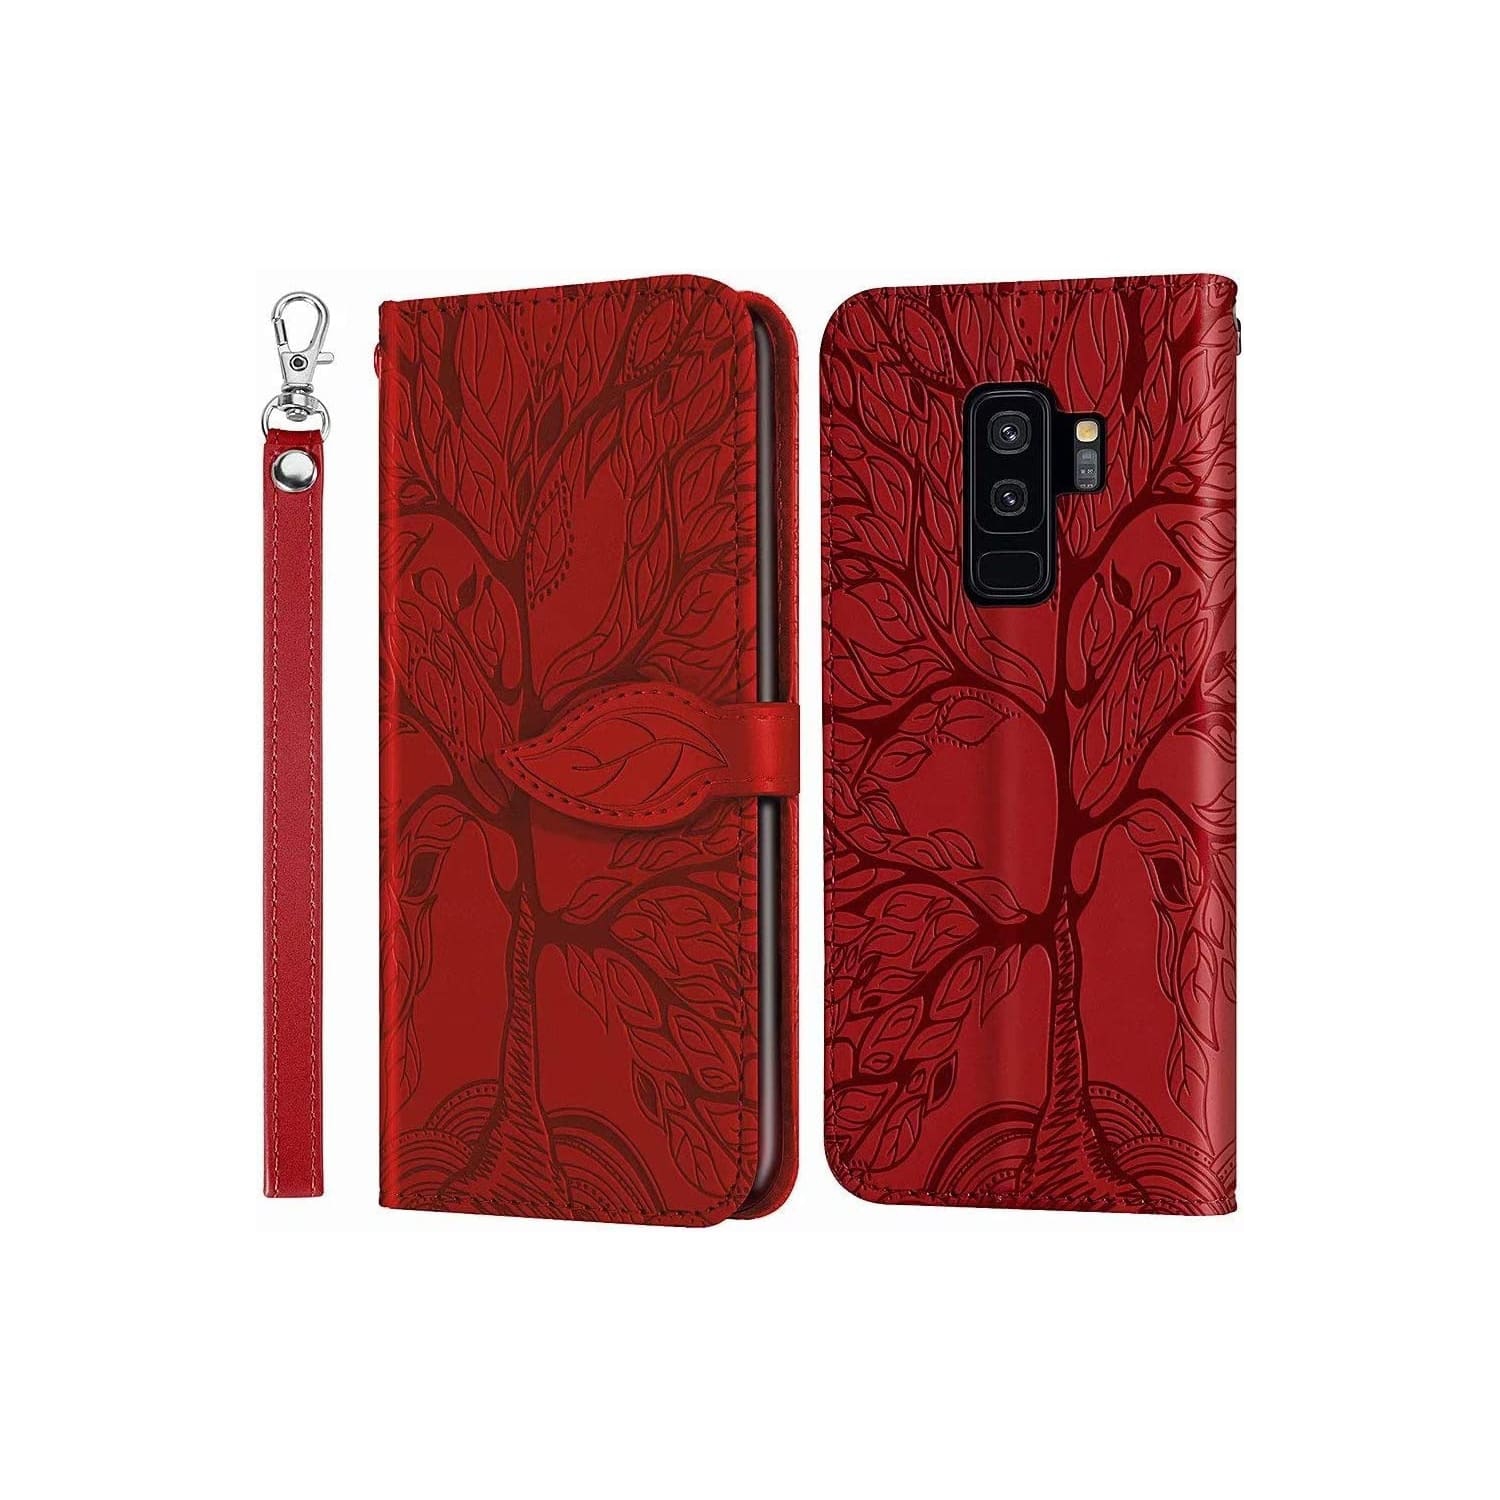 Premium PU Leather Embossed Tree Wallet Phone Case with card slots and wrist strap for Samsung Galaxy S9 Plus SM-G965